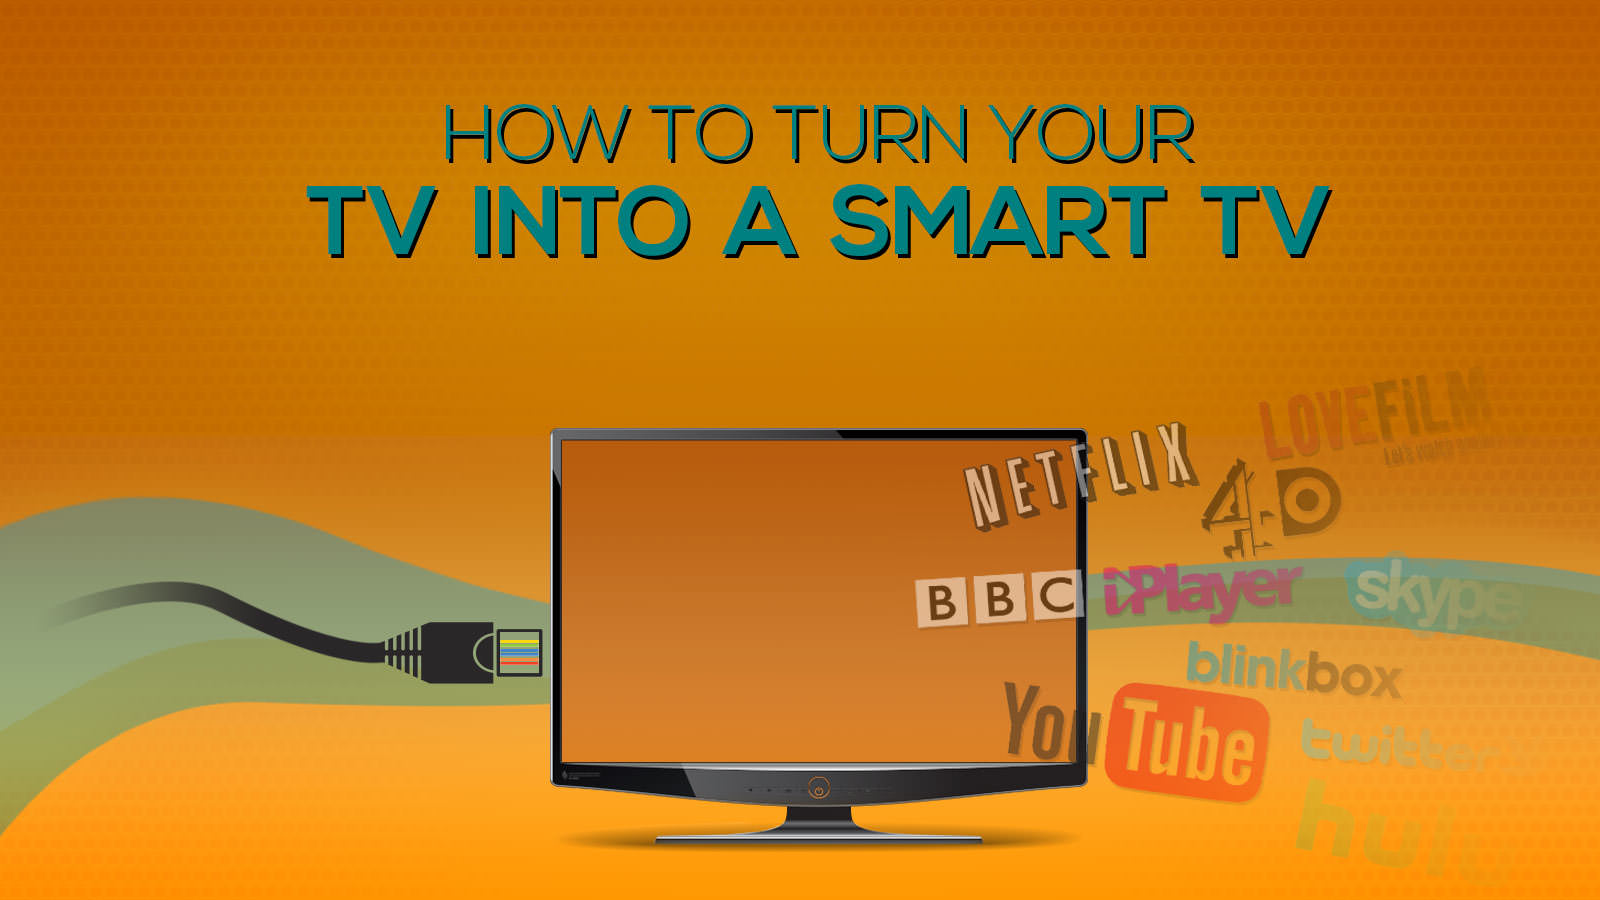 Turn a TV Into Smart TV